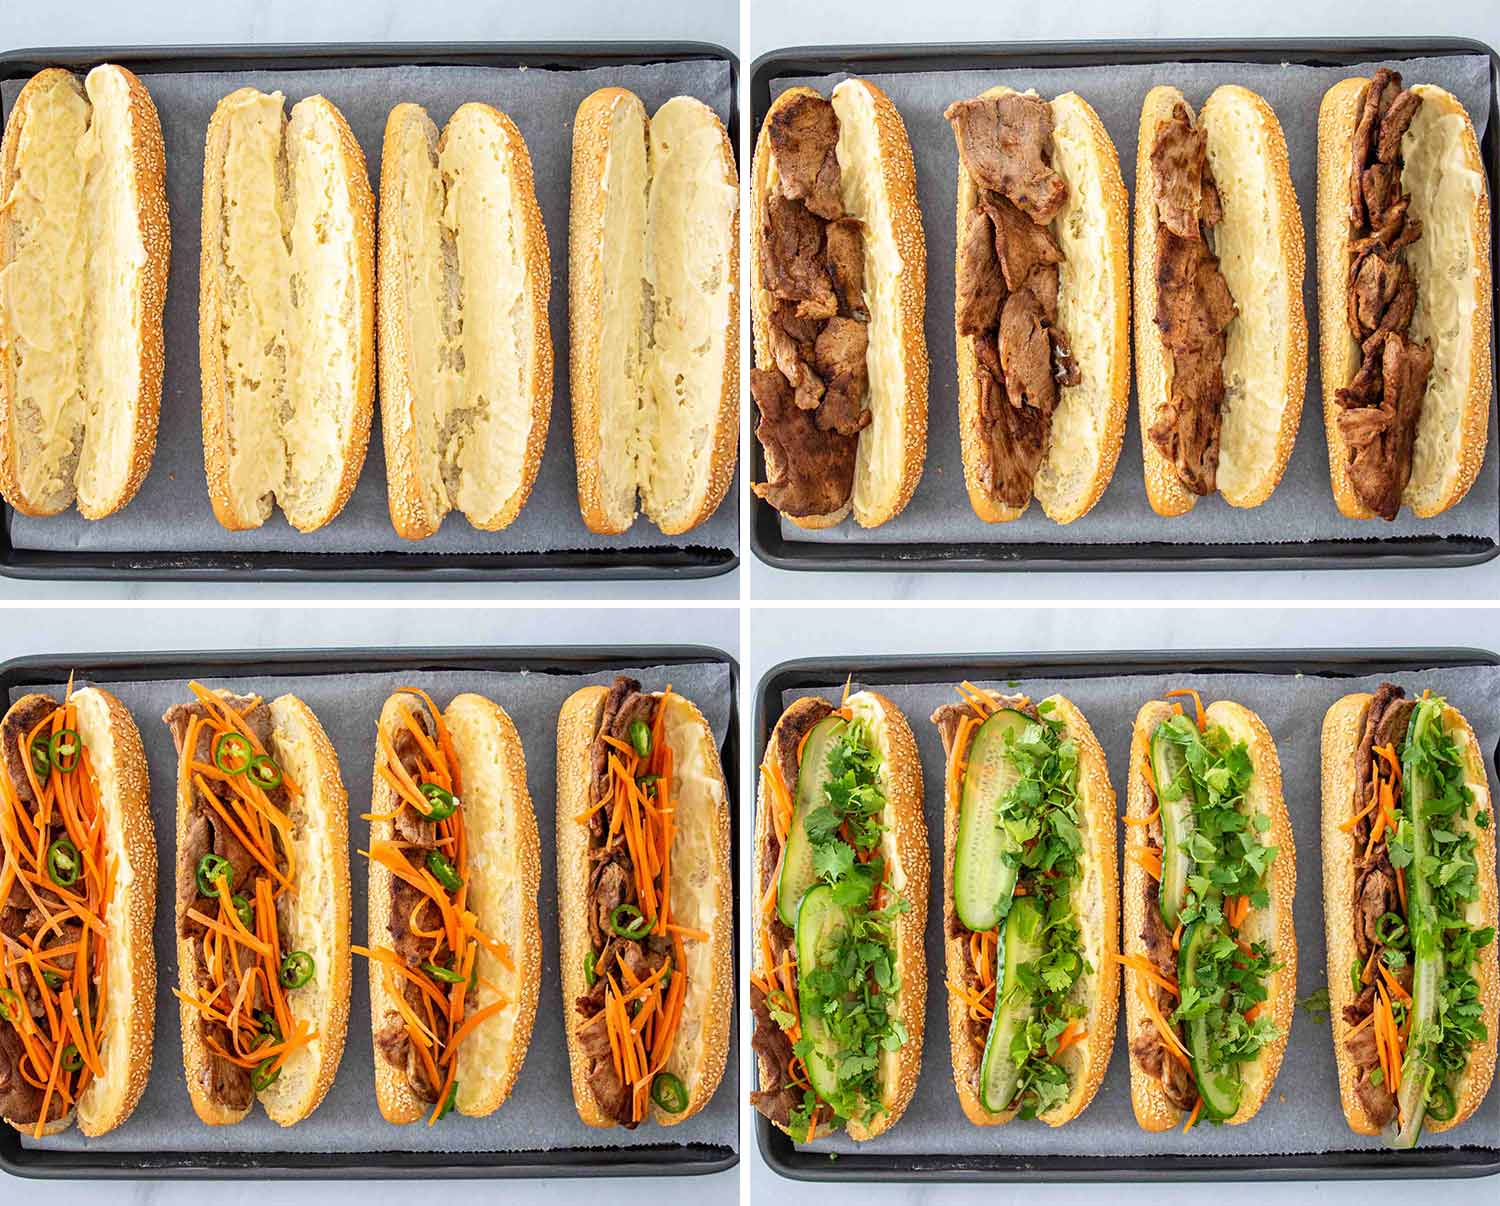 process shots showing how to make banh mi sandwiches.